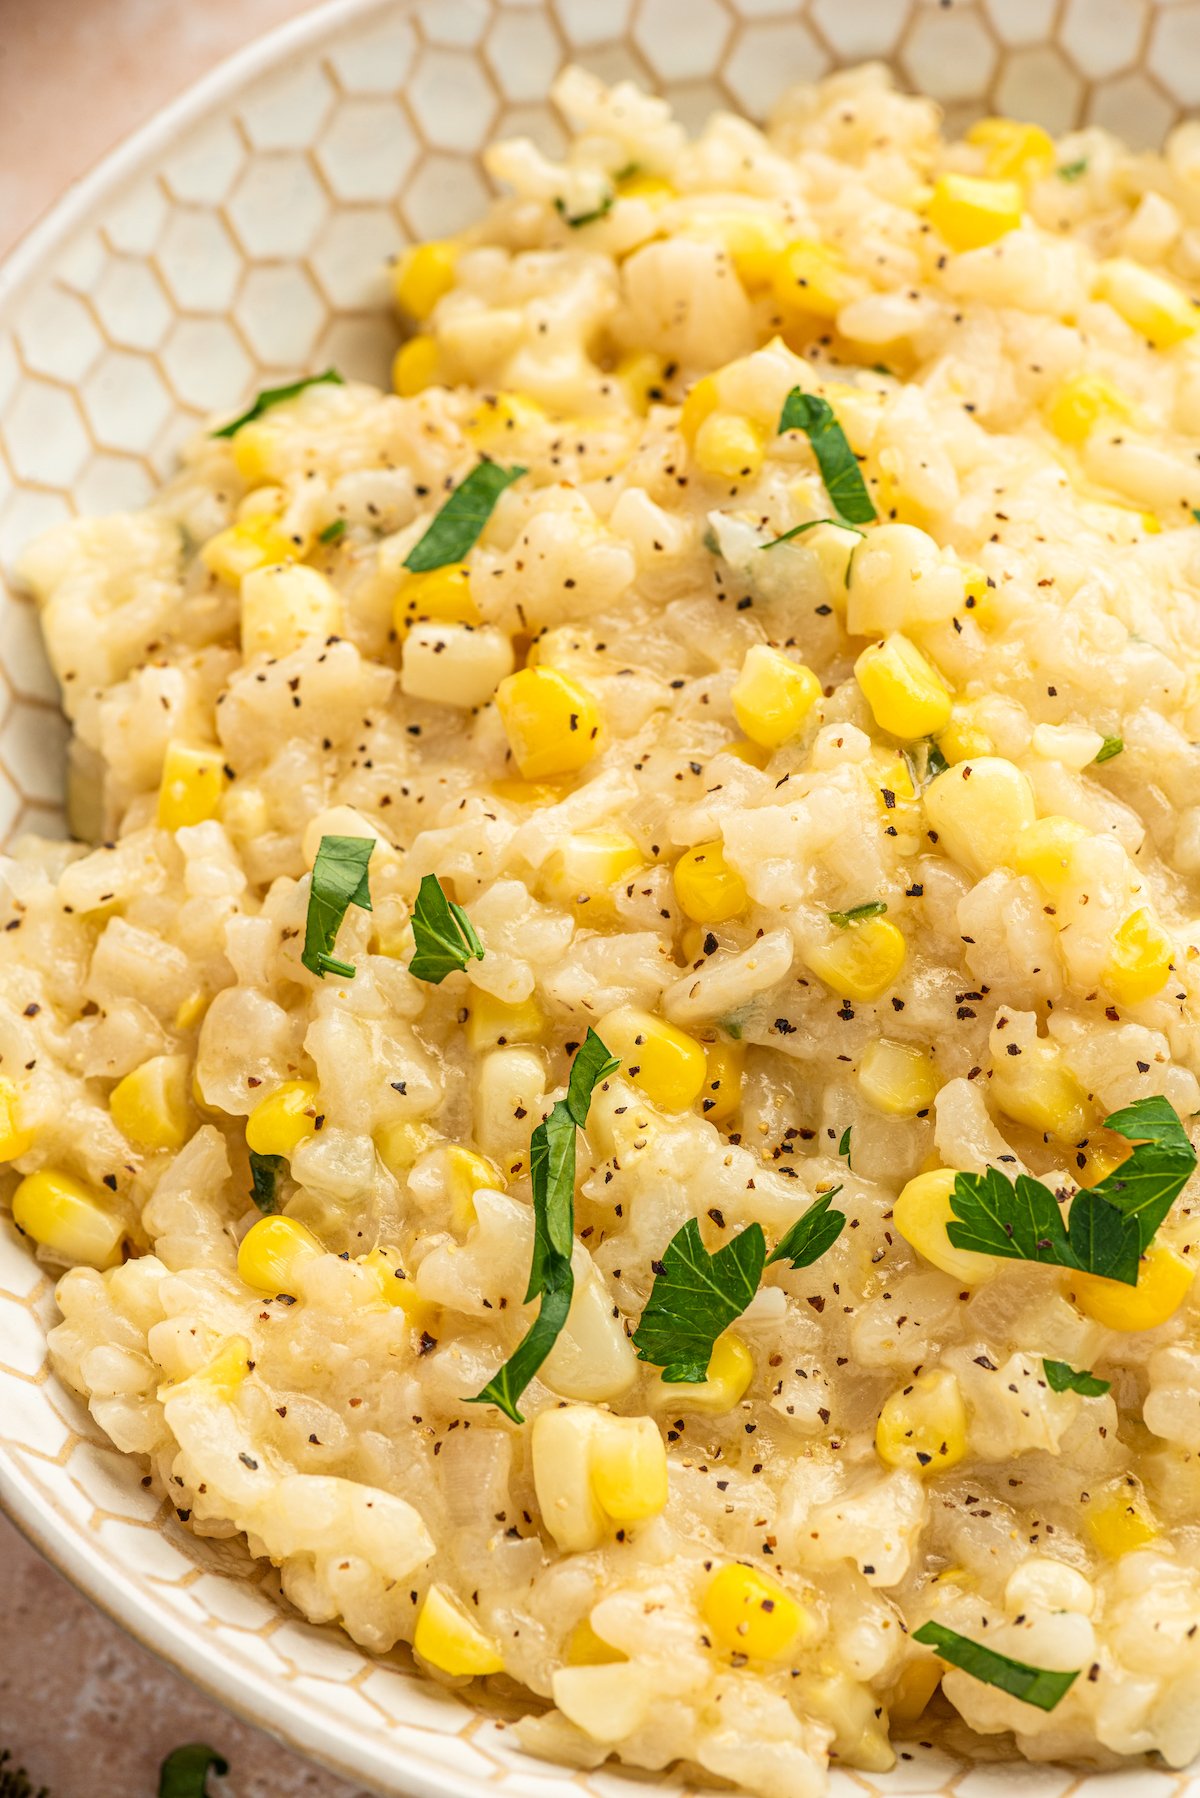 Sweet corn risotto with fresh parsley on top.